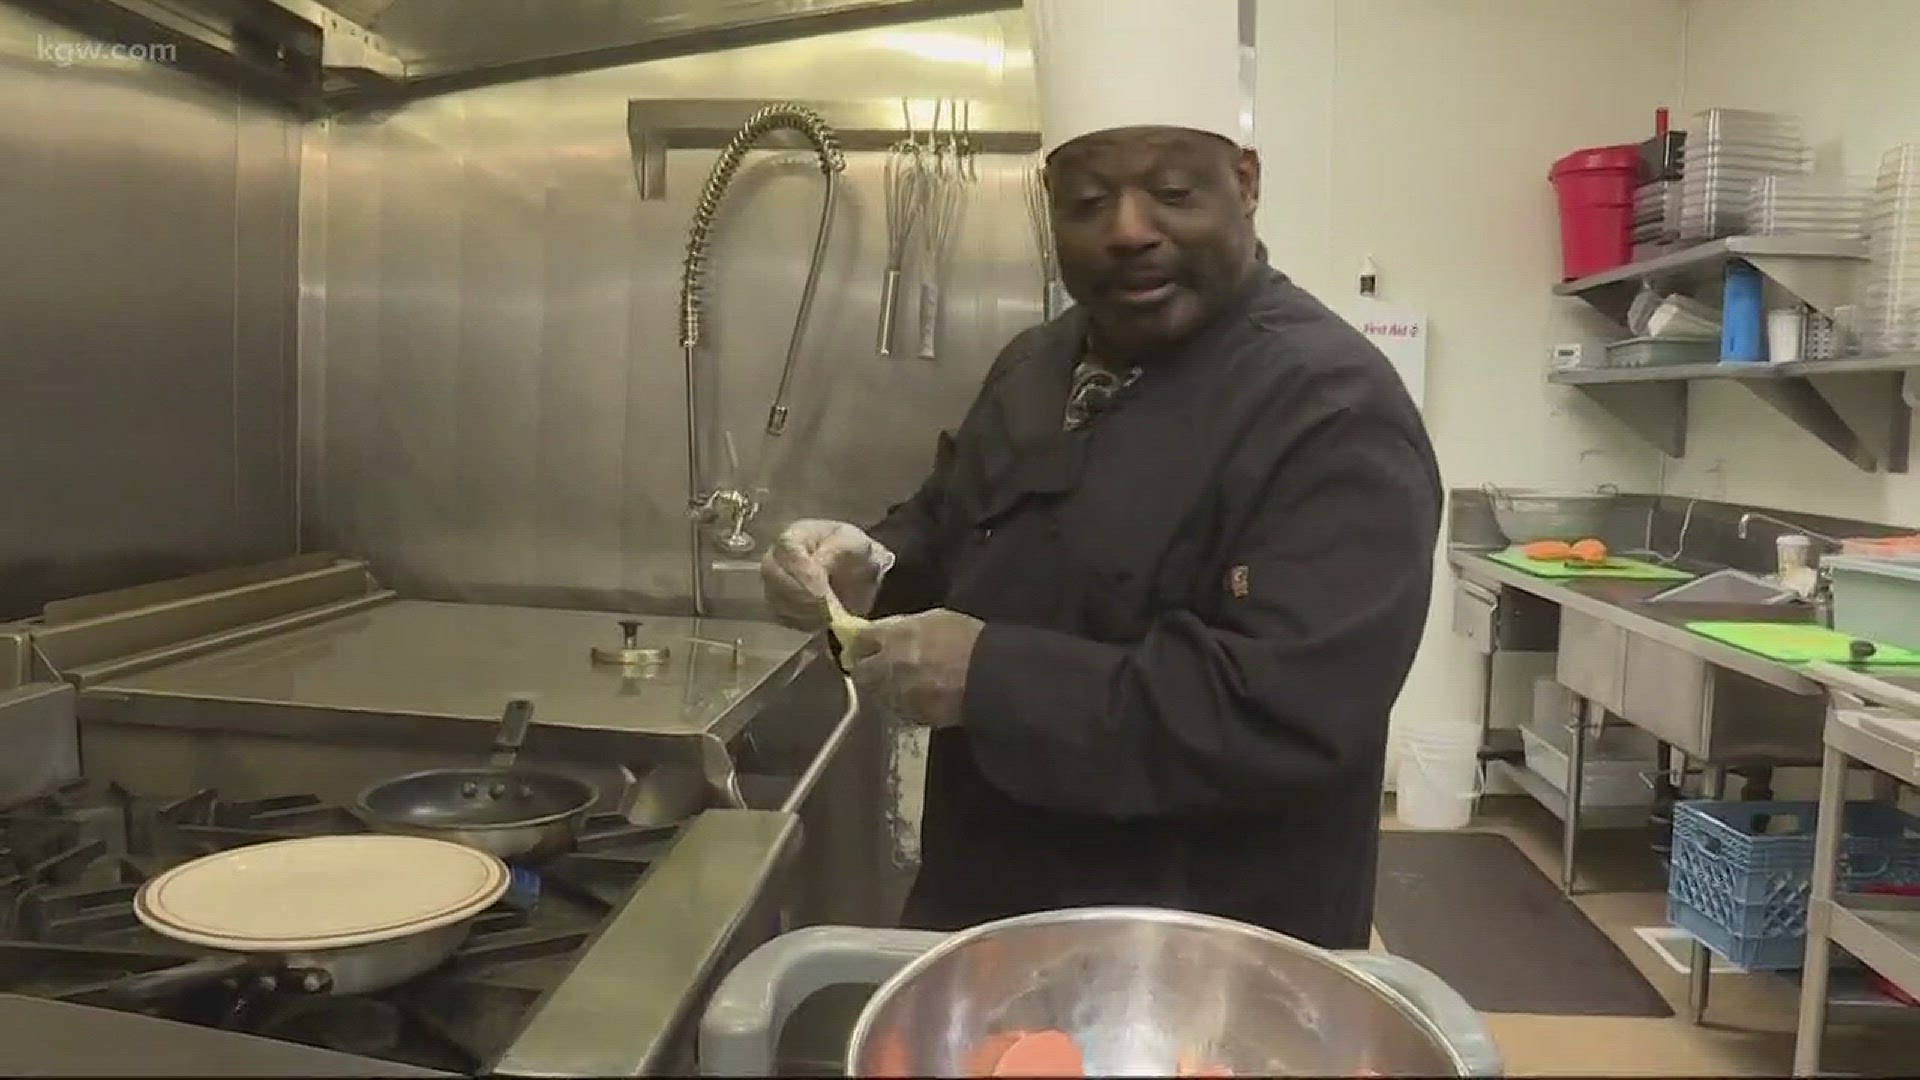 This year's Thanksgiving meal at Union Gospel Mission includes a family recipe of yams.